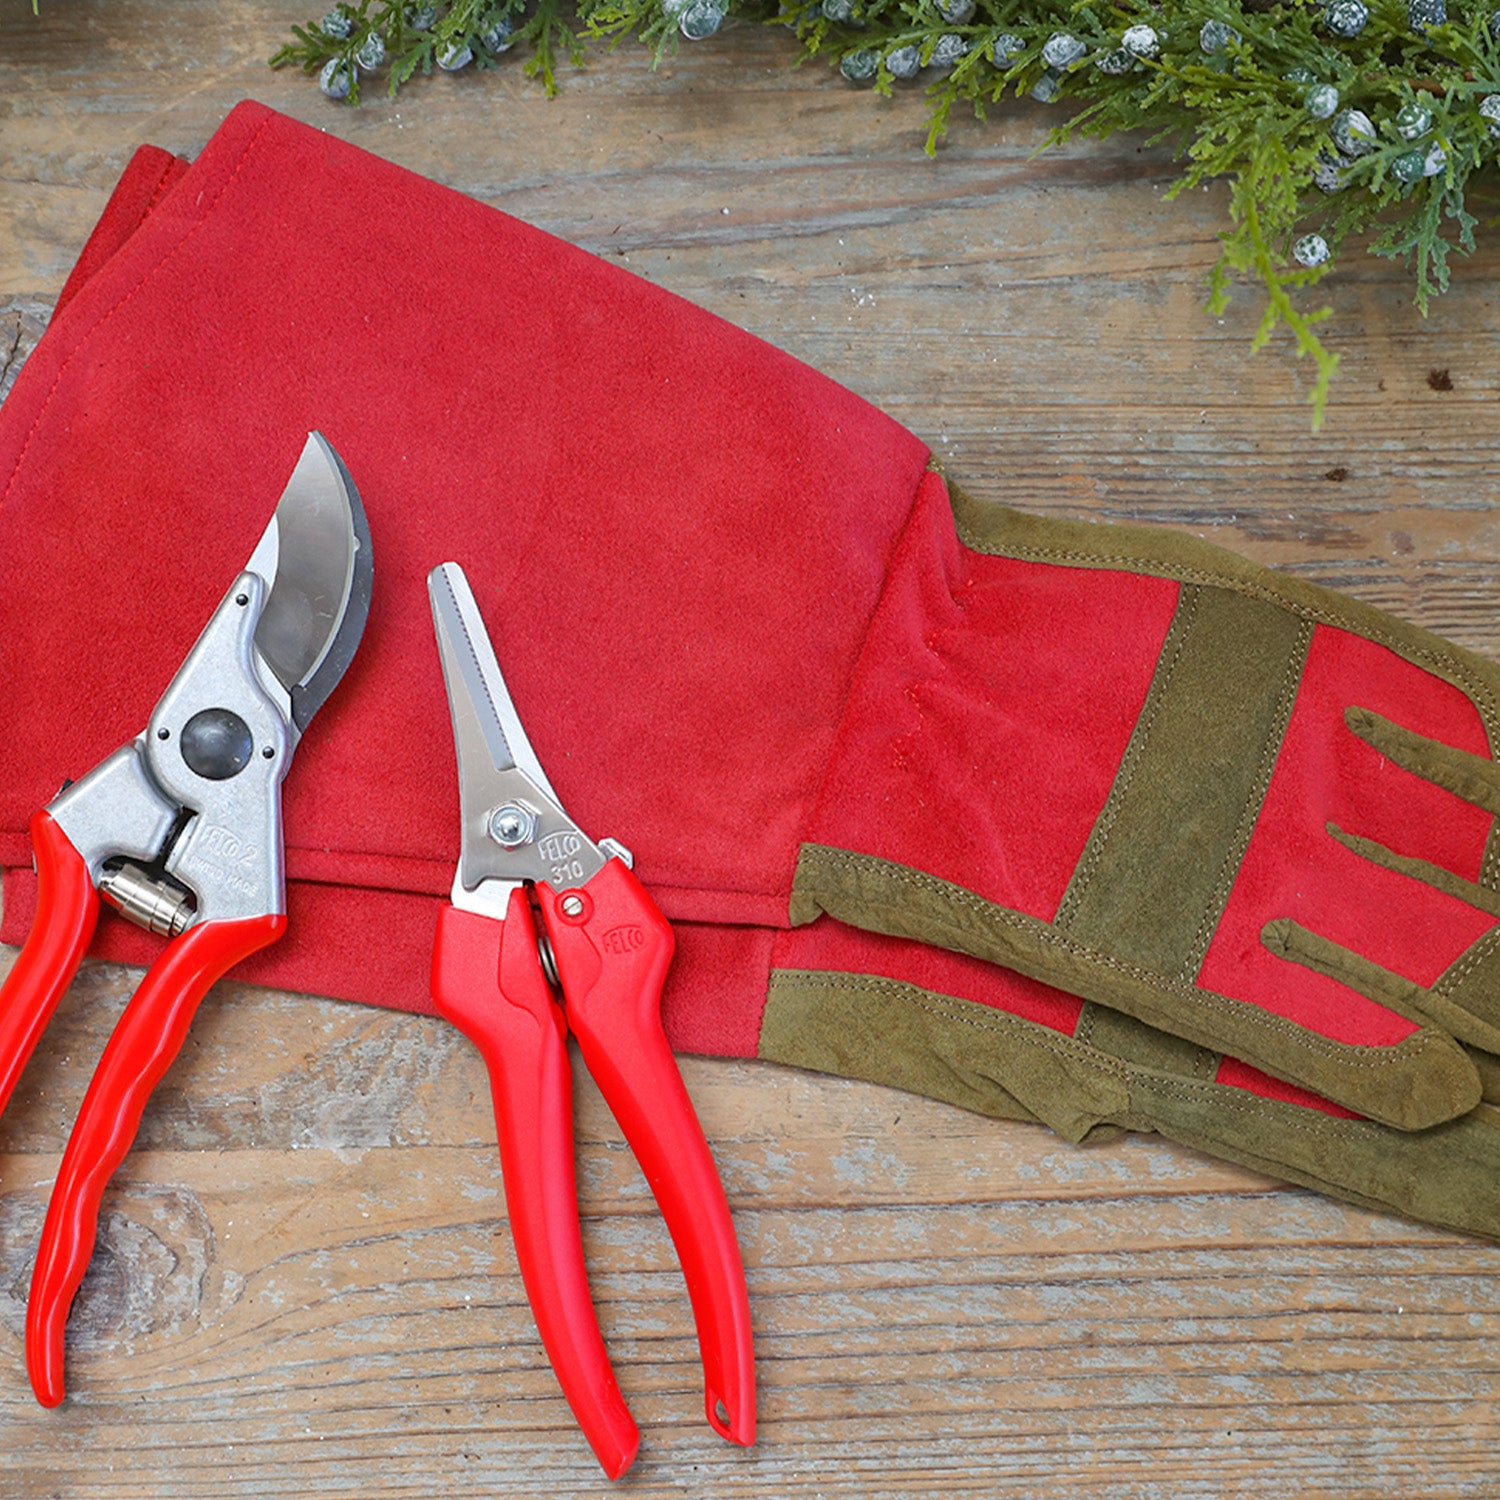 The Best Gifts for Gardeners